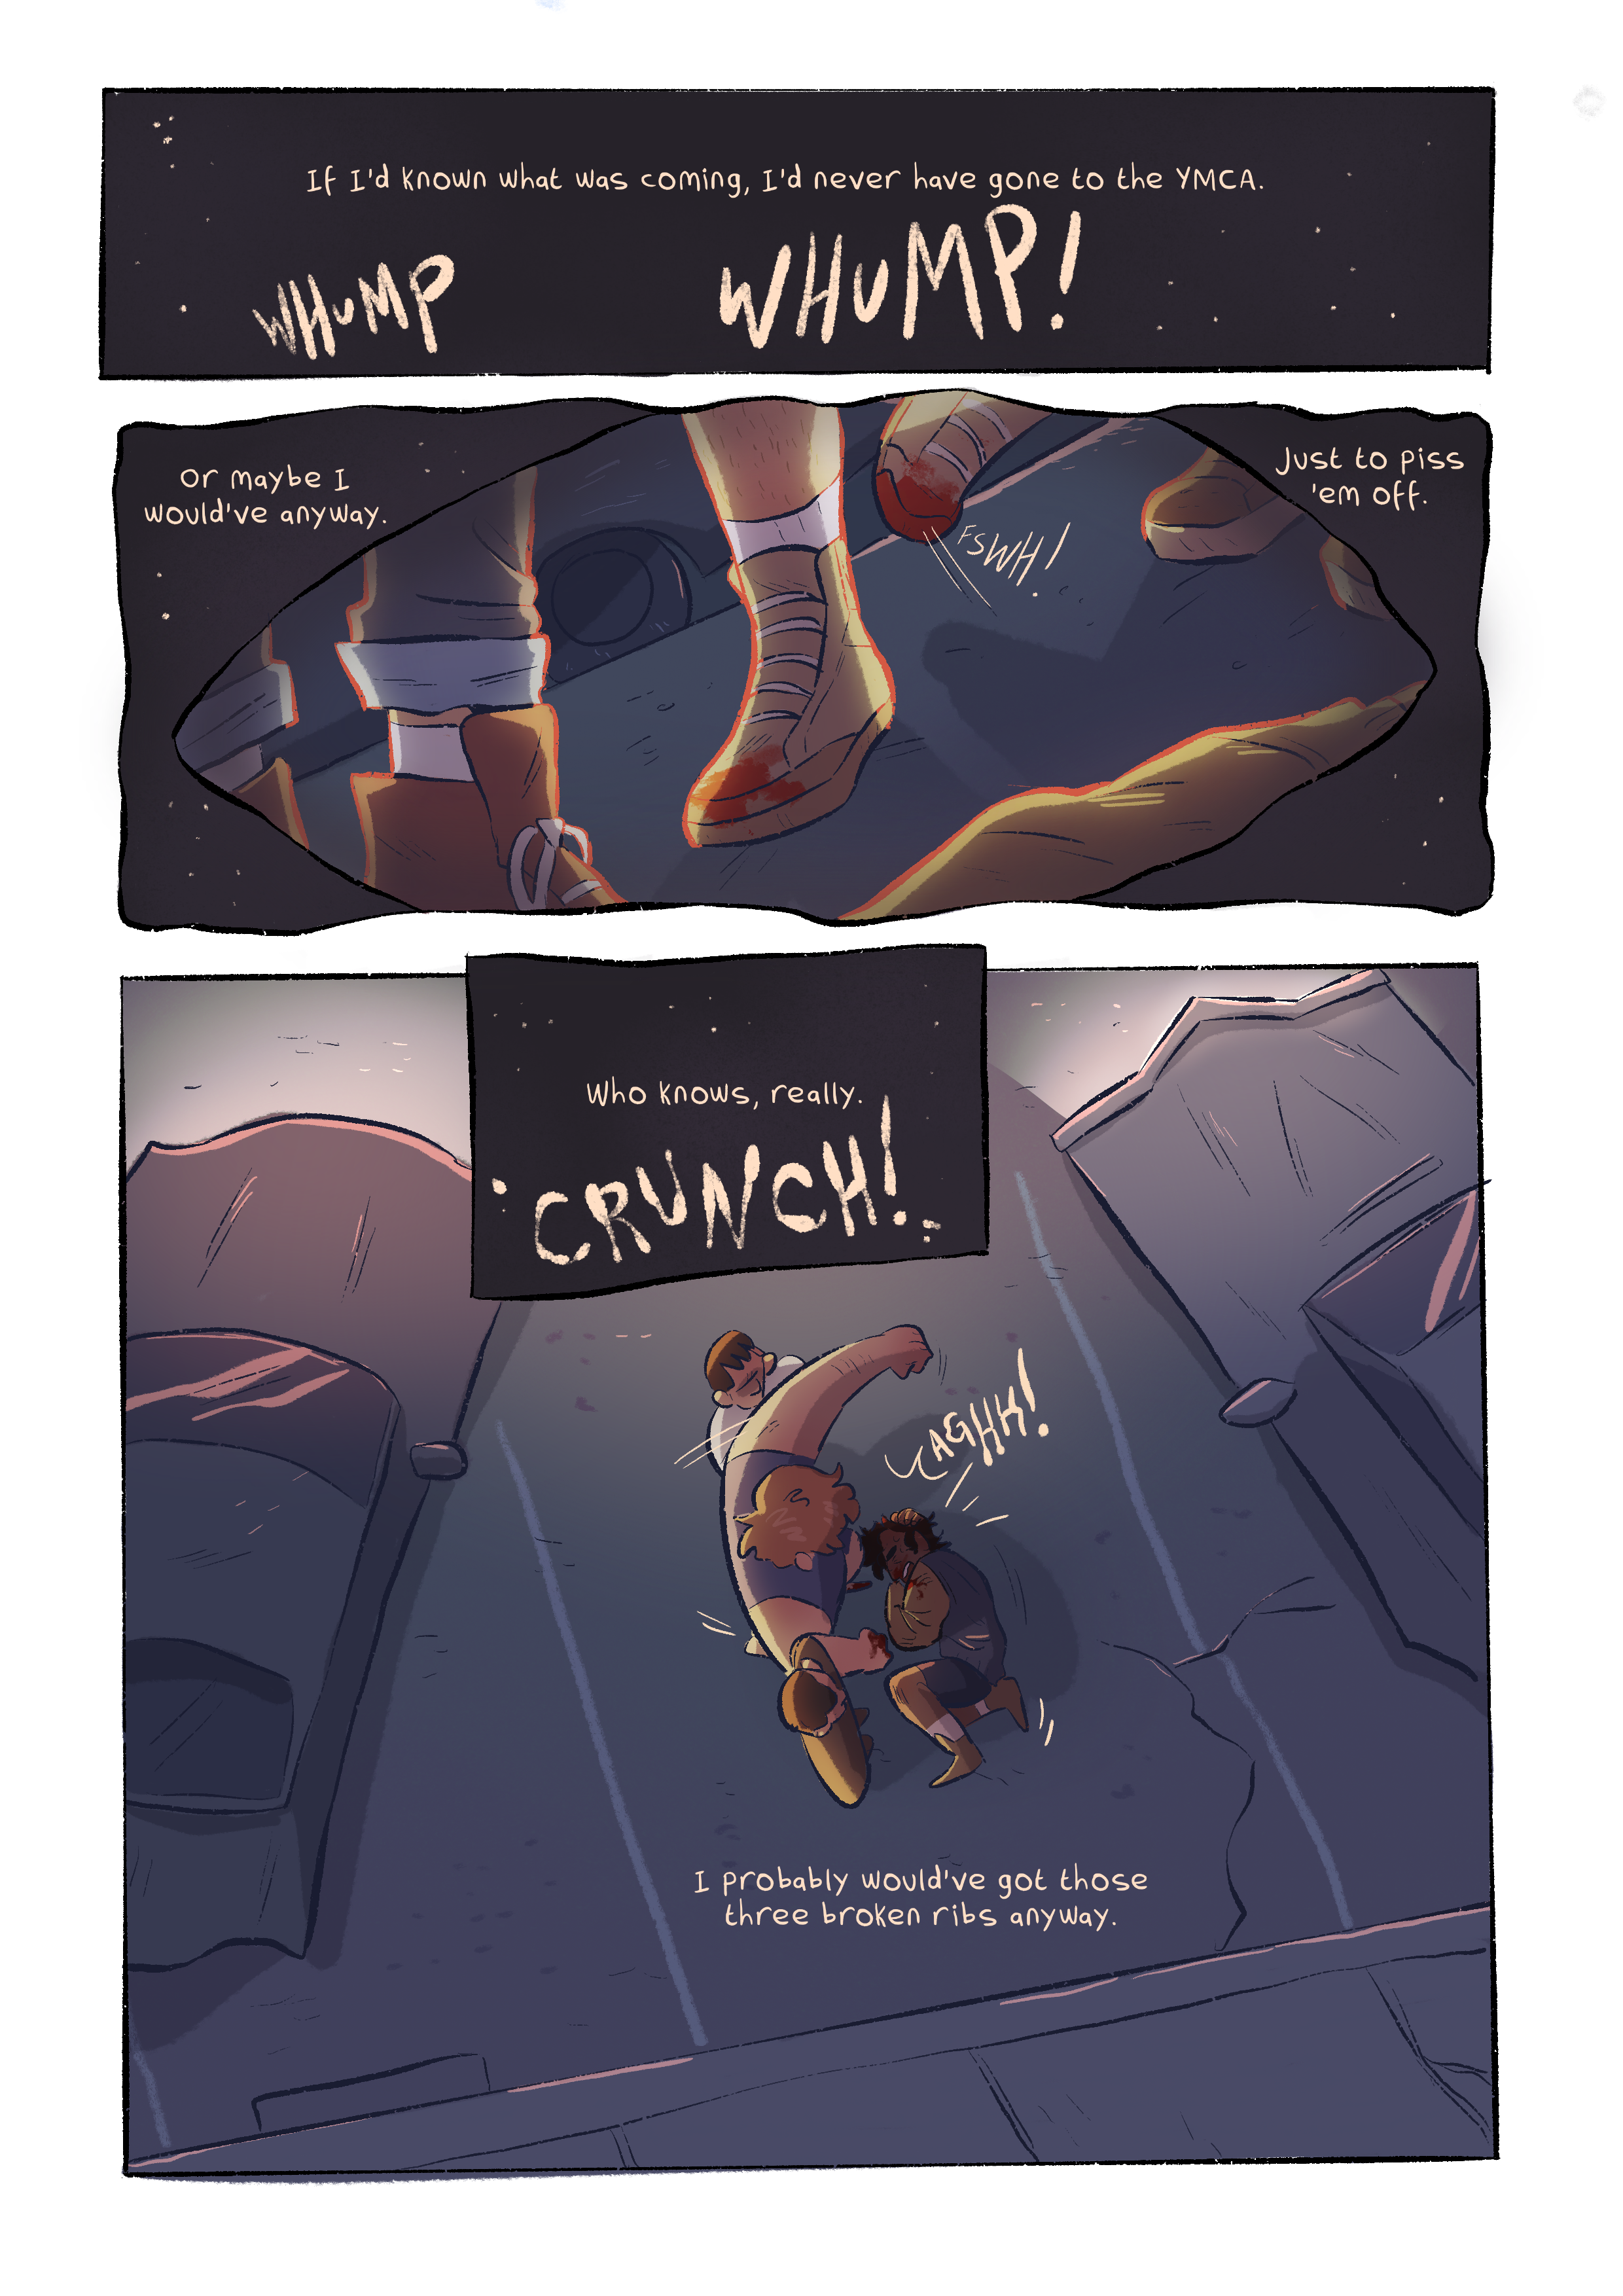 Pg02_NEW.png